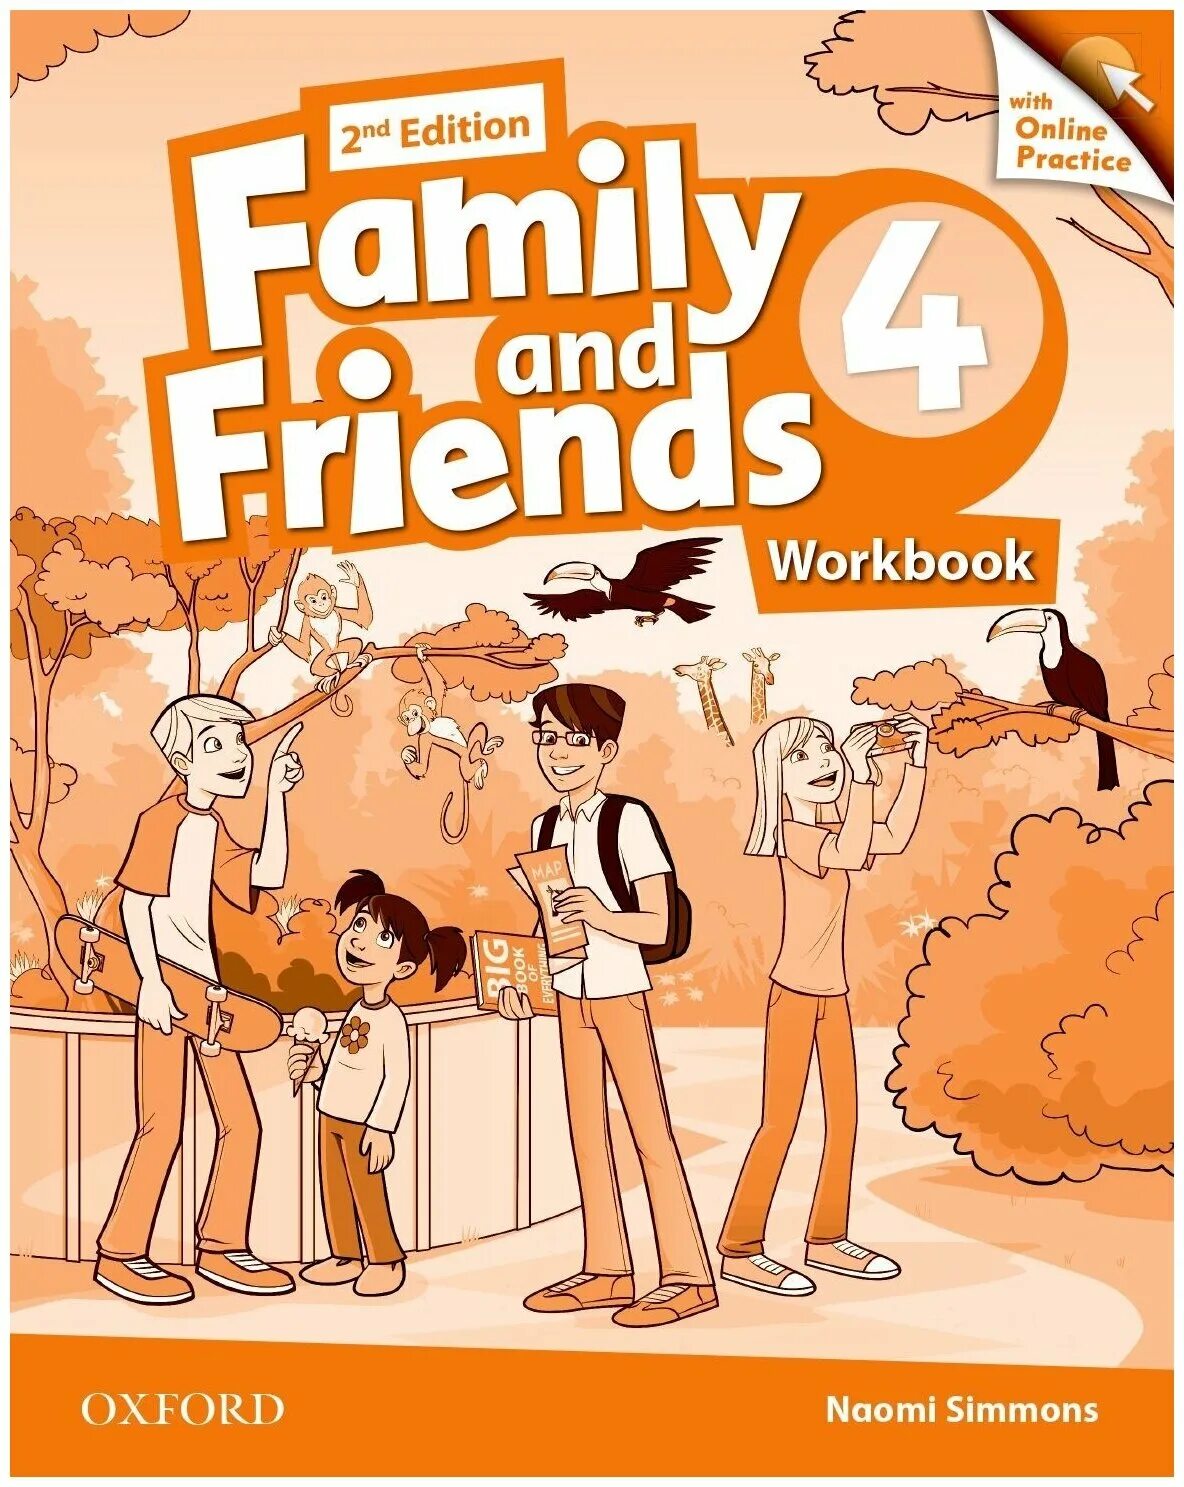 Wordwall family and friends 4. Family and friends4 Workbook 2nd Edition ответы Naomi Simmons. Family and friends 3 Workbook. Книга Family and friends 2. Edition Family and friends Workbook Naomi Simmons.